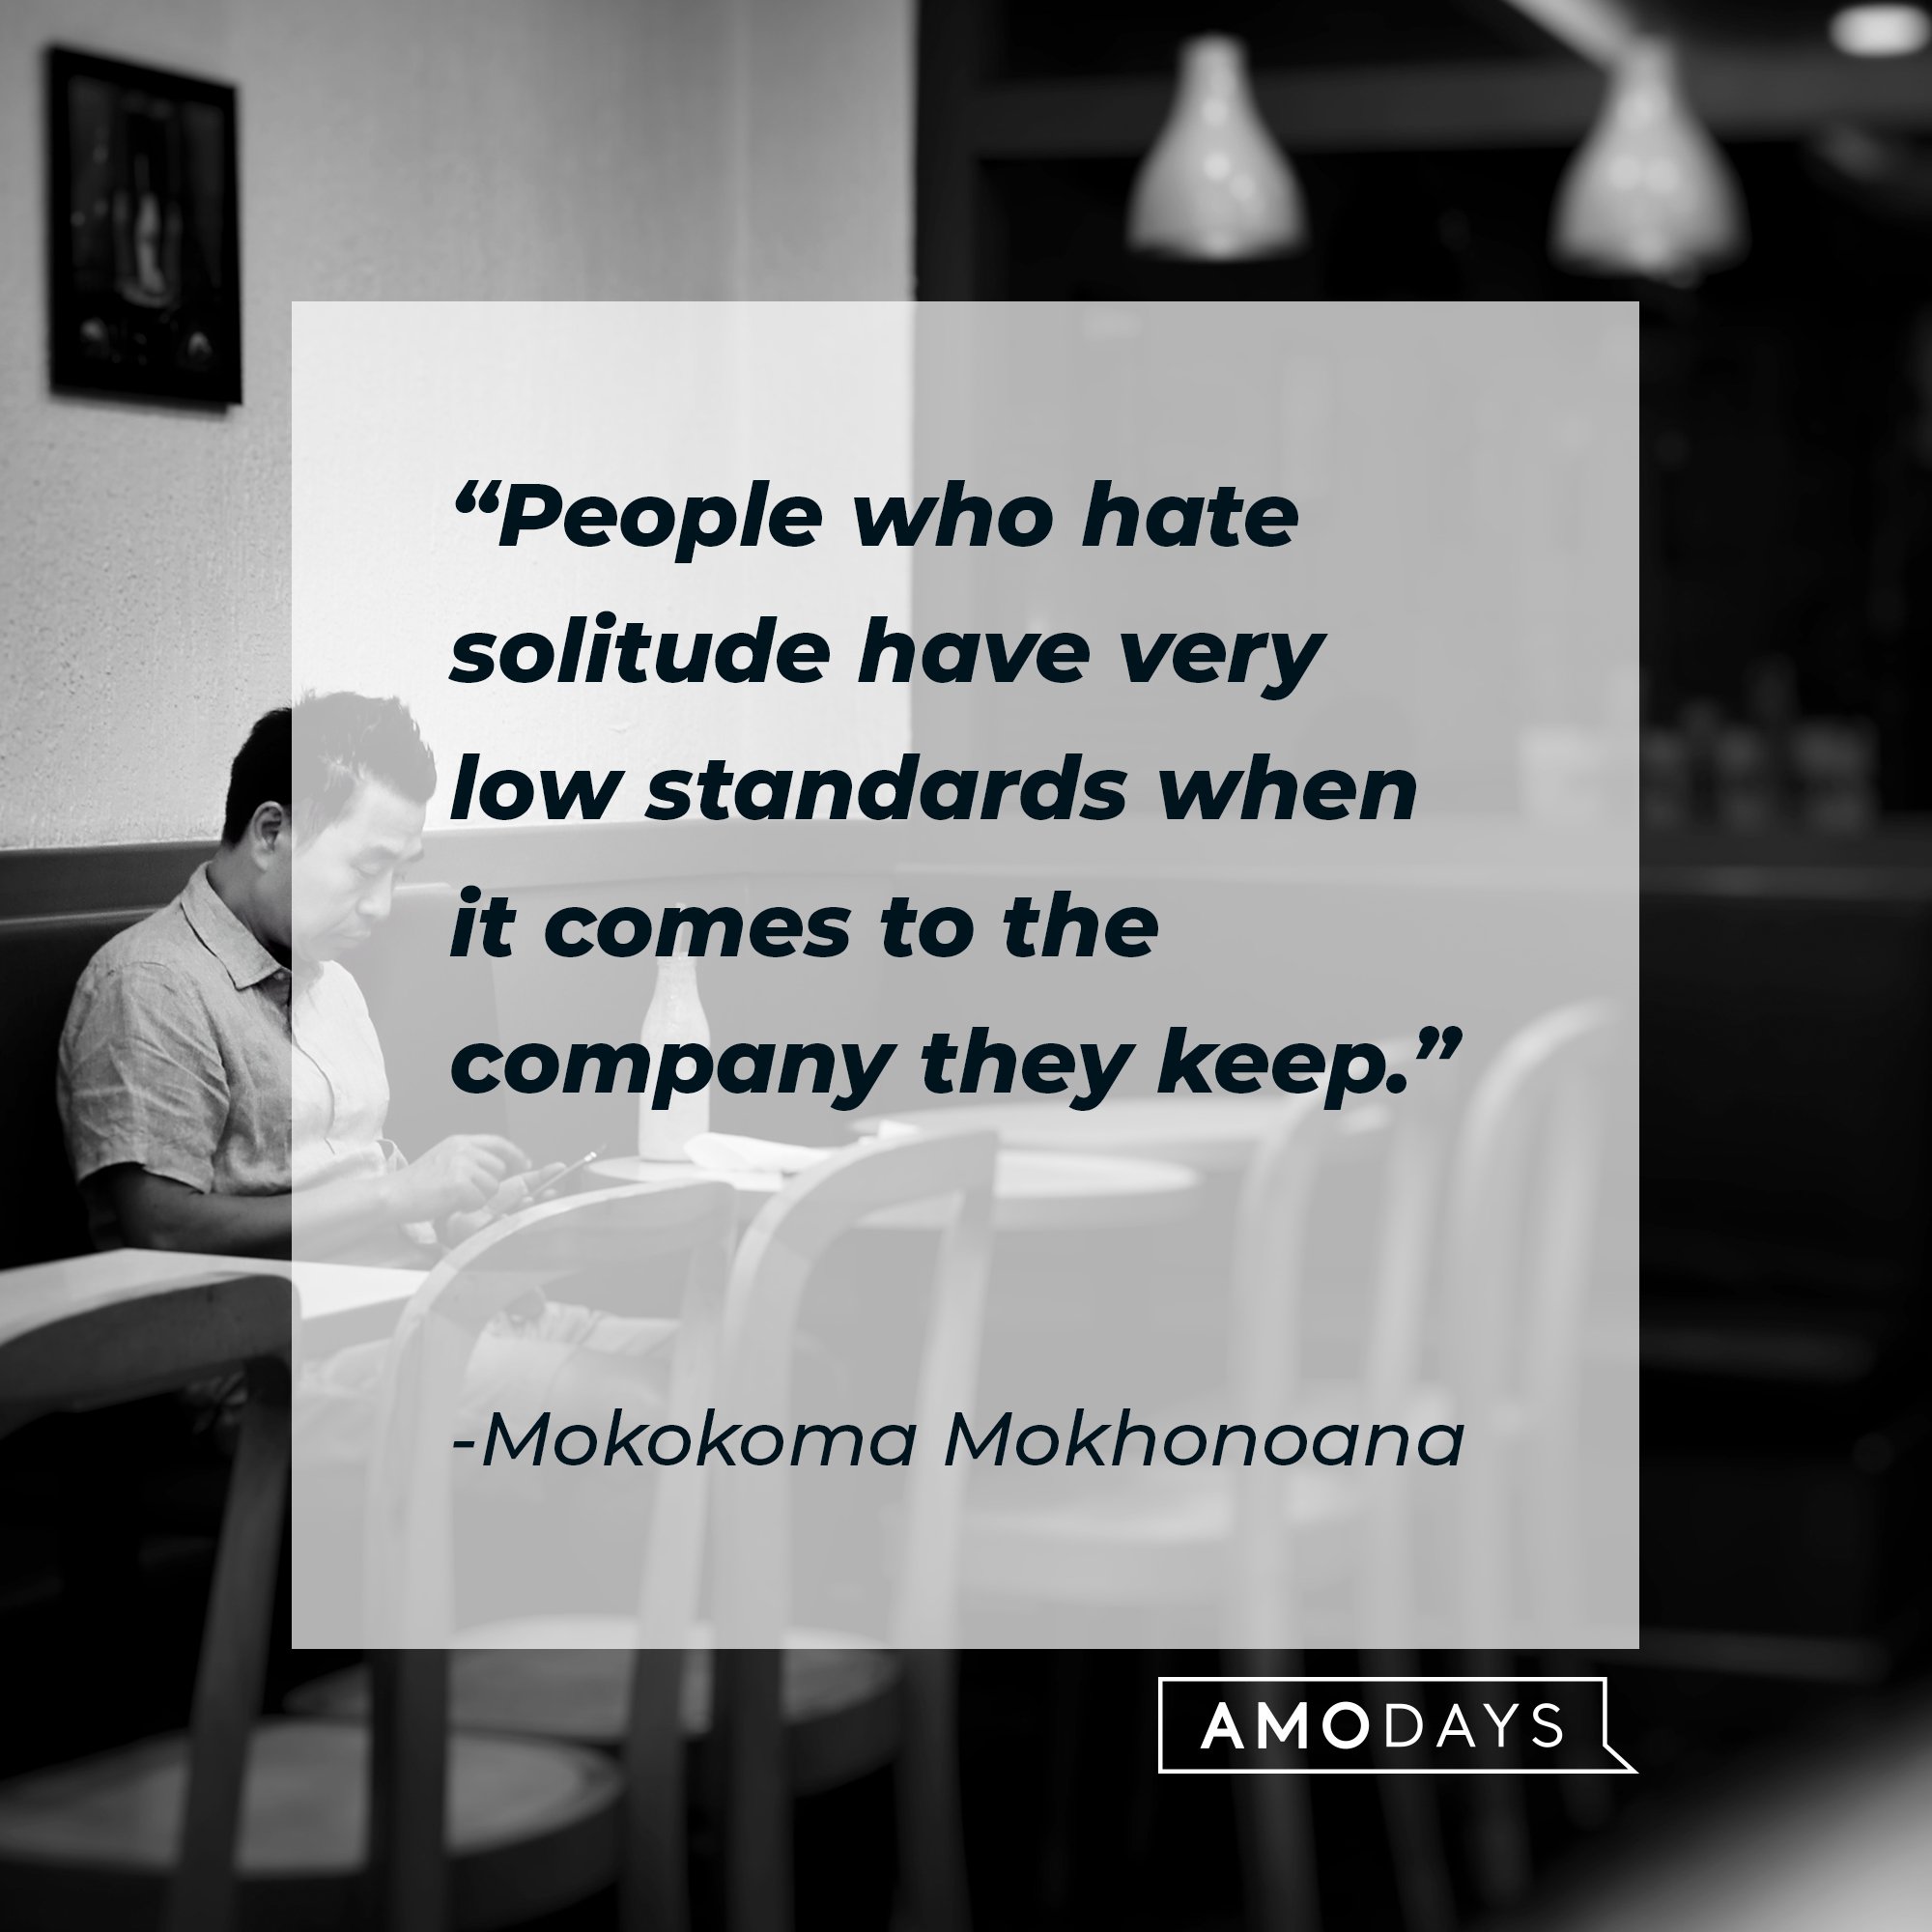 Mokokoma Mokhonoana’s quote: "People who hate solitude have very low standards when it comes to the company they keep." | Image: AmoDays